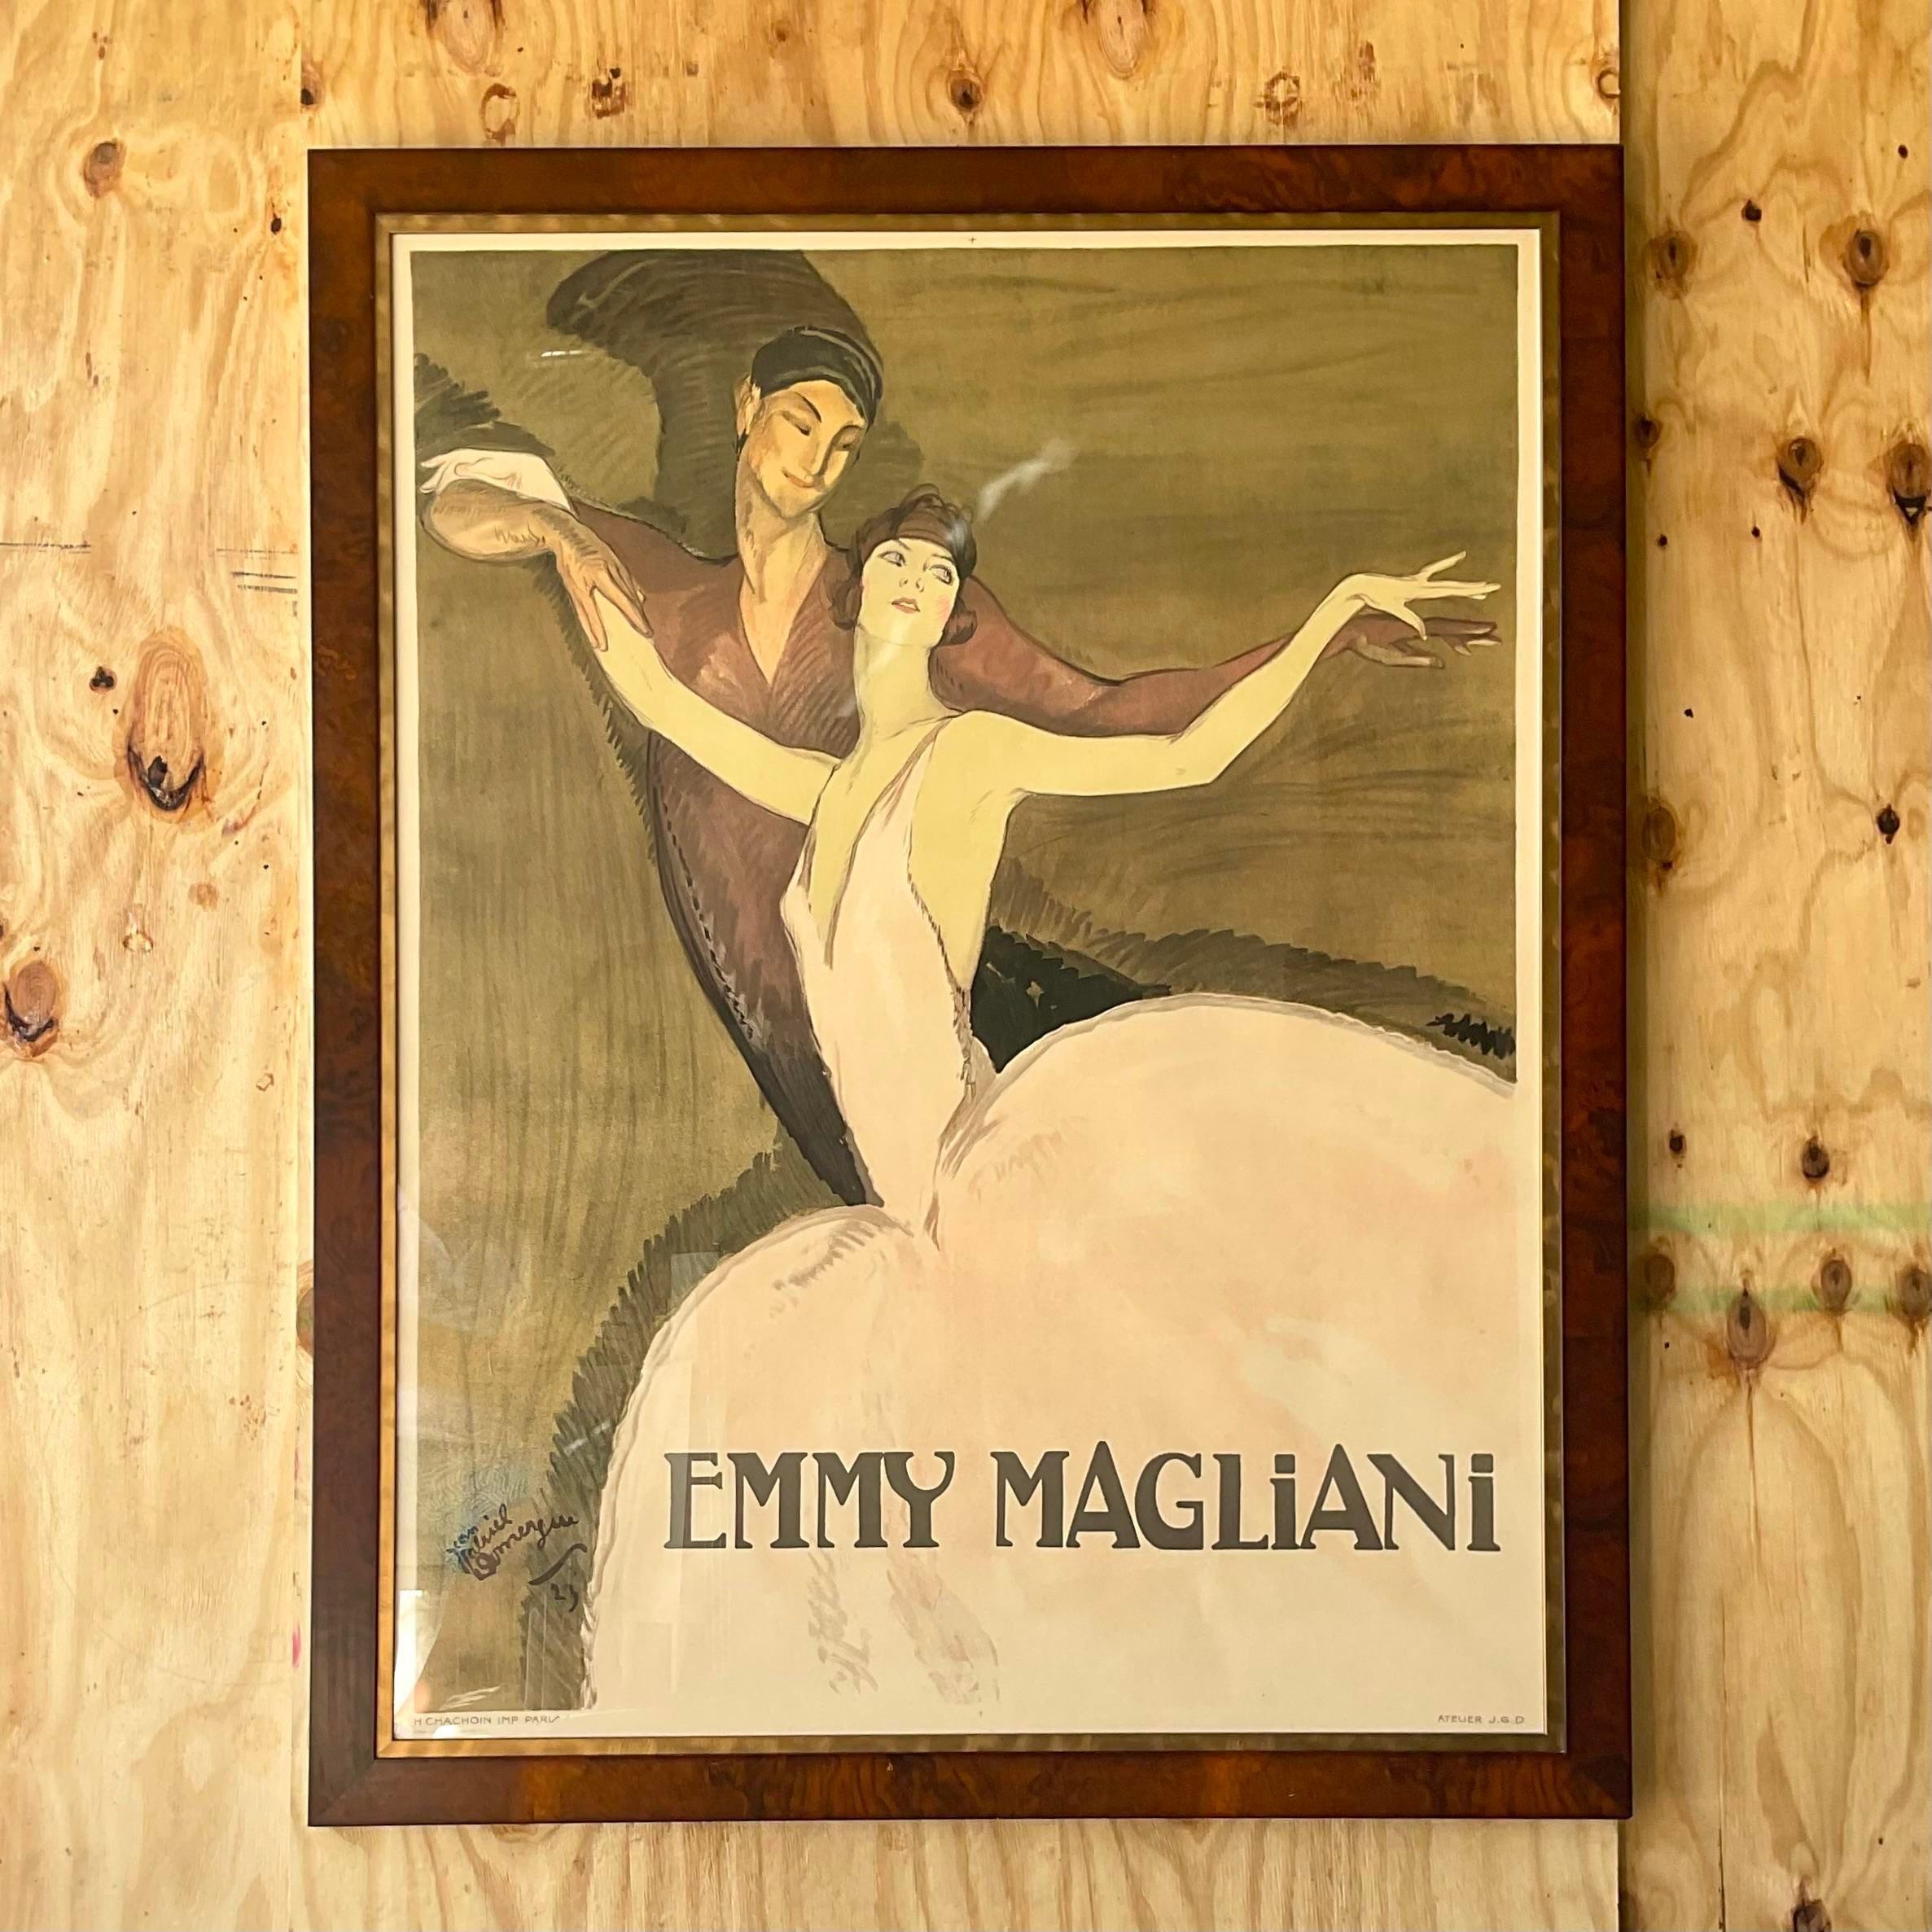 A stunning vintage Boho French advertisement poster. A chic image for thr Emmy Magliani ballet. Beautifully framed in a rich Burl wood. Acquired from a Palm Beach estate.